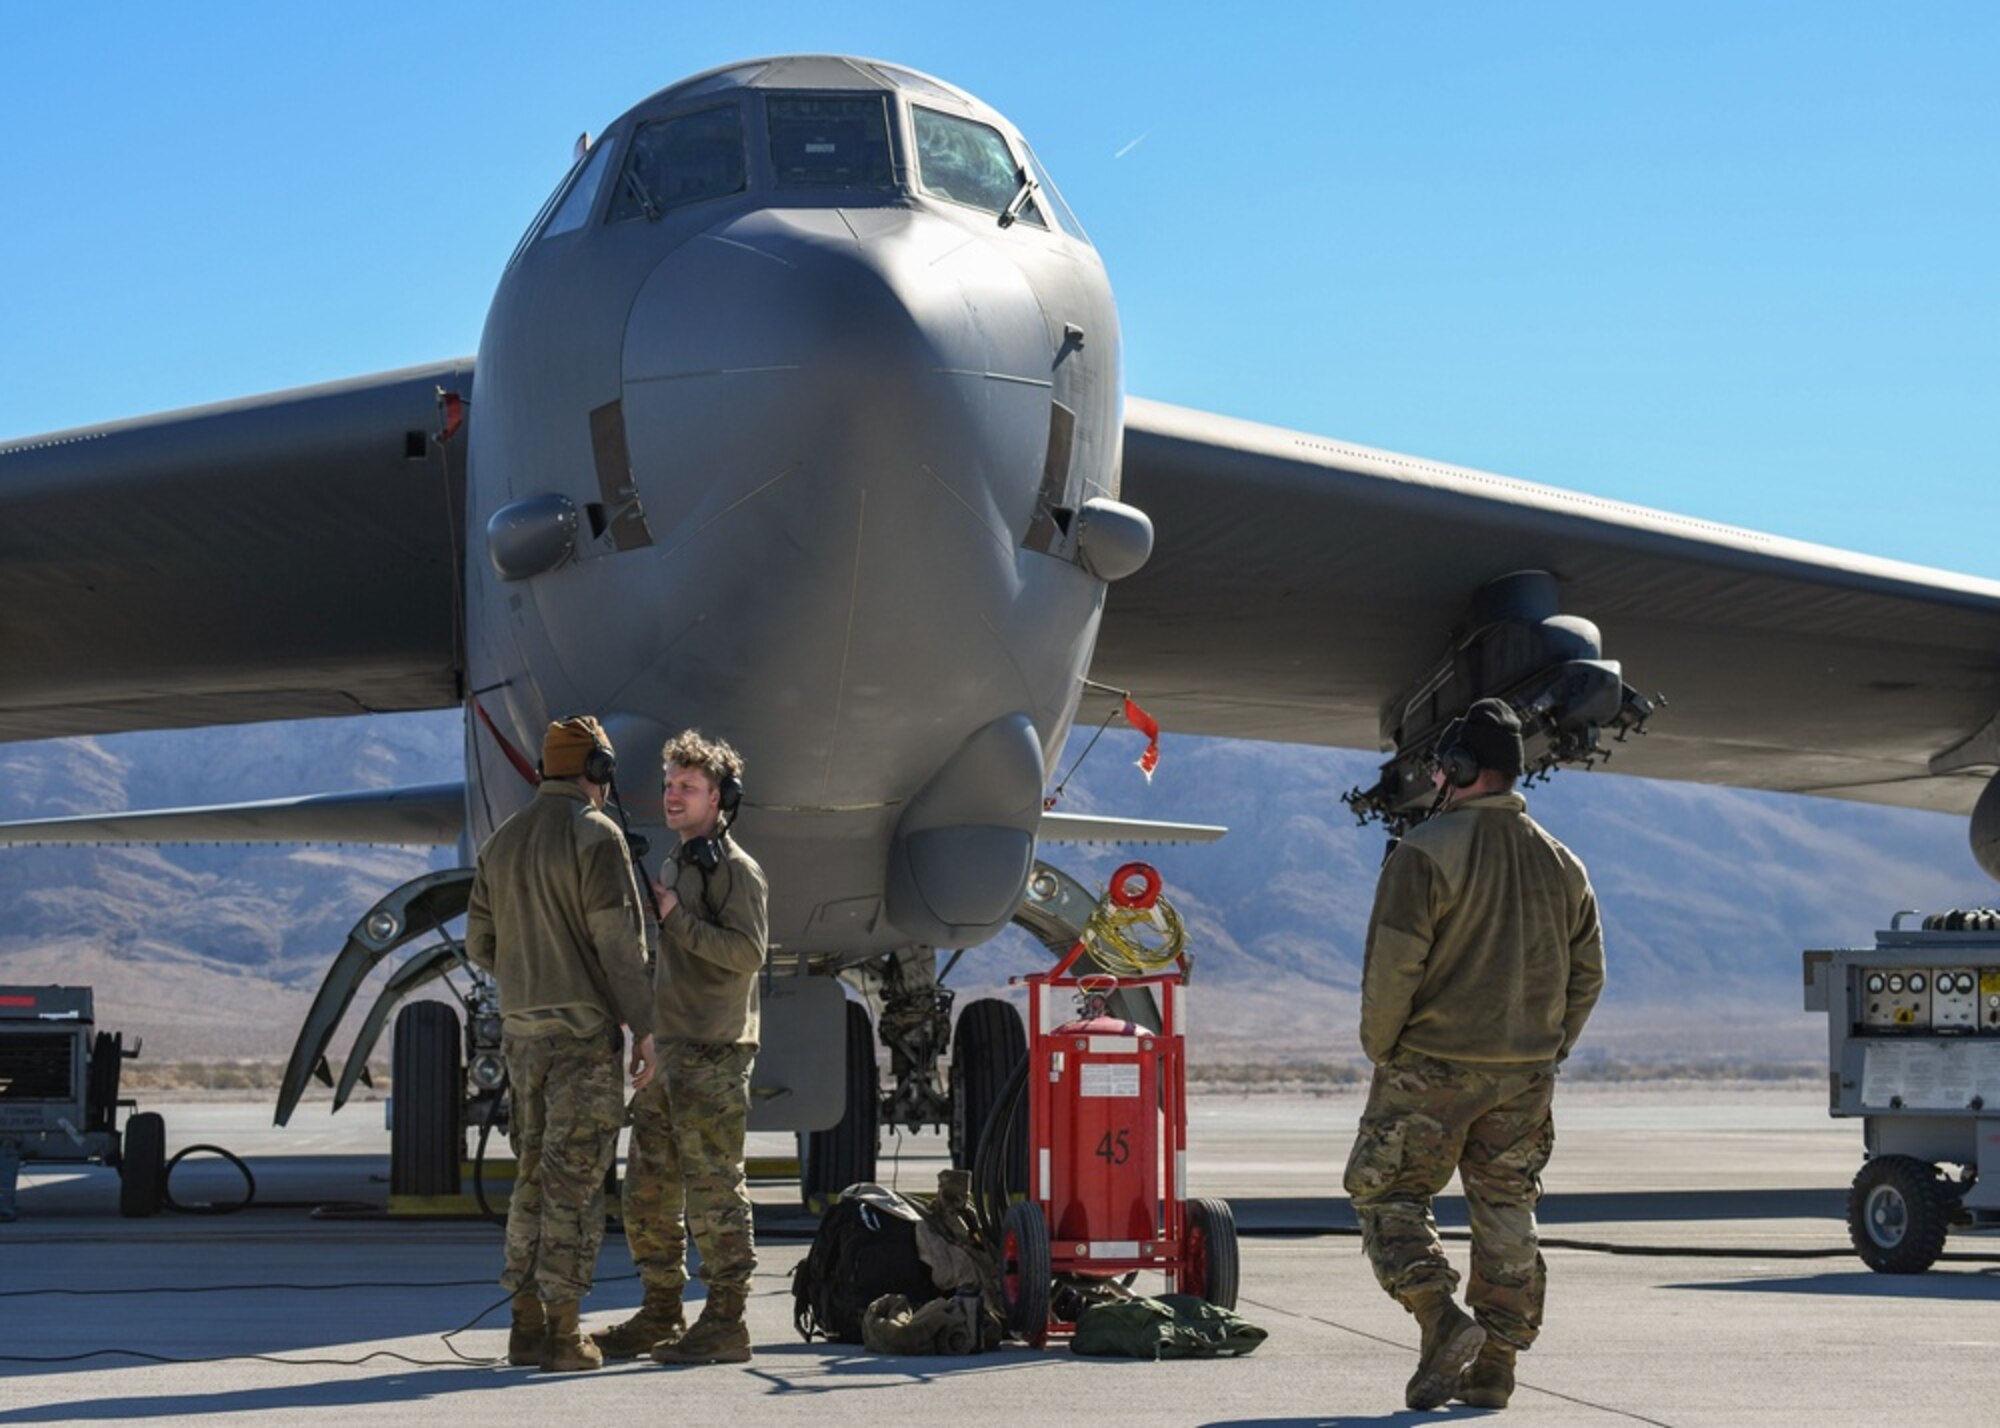 Airmen with the 5th Aircraft Maintenance Squadron perform B-52H Stratofortress preflight procedures during Red Flag-Nellis 22-1 on Jan. 26, 2022, at Nellis Air Force Base, Nevada. The 5 AMXS is one of 32 units from across the U.S. joint forces, United Kingdom (Royal Air Force) and Australia (Royal Australian Air Force) participating in Red Flag-Nellis 22-1. (U.S. Air Force photo by Senior Airman Michael A. Richmond)